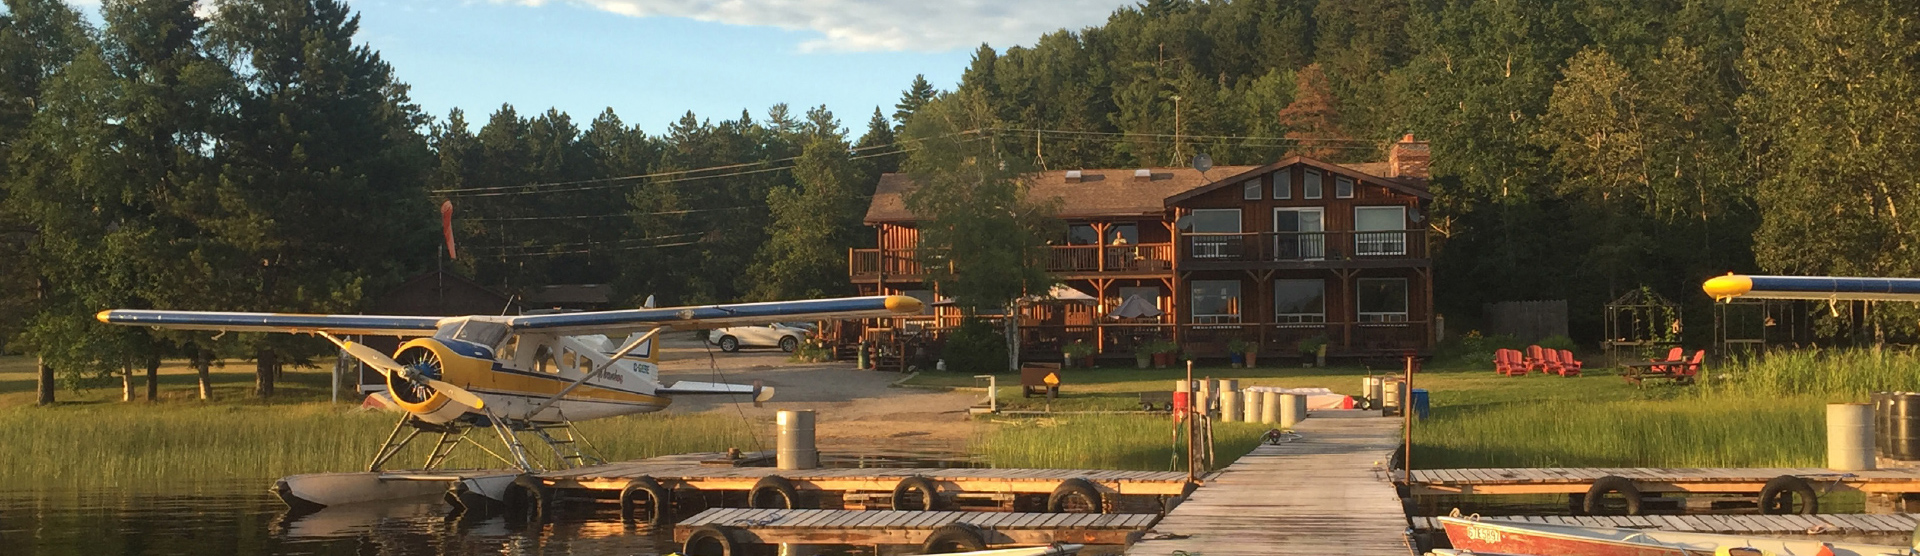 Float Plane by Fishing Dock in Front of Lodge